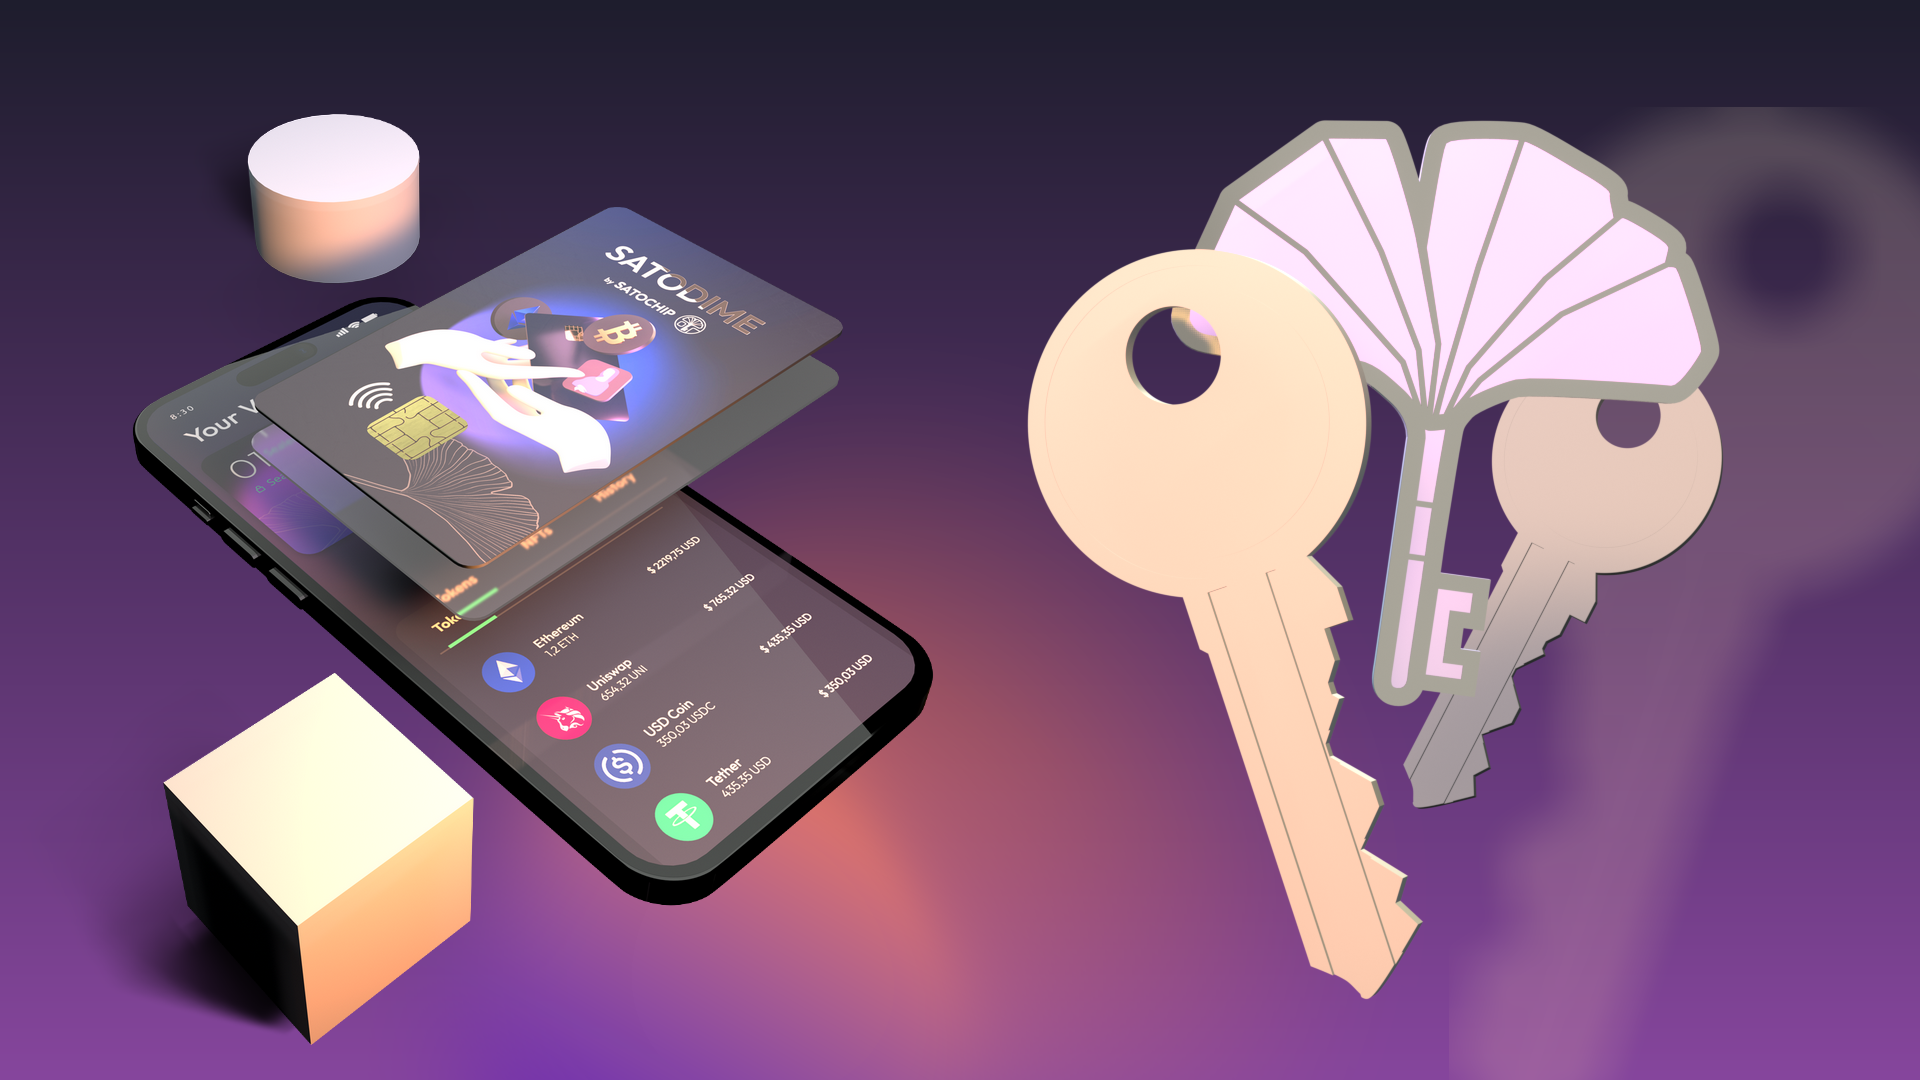 A Satodime card illustration and its companion mobile app from where you can export the cryptocurrency private key.